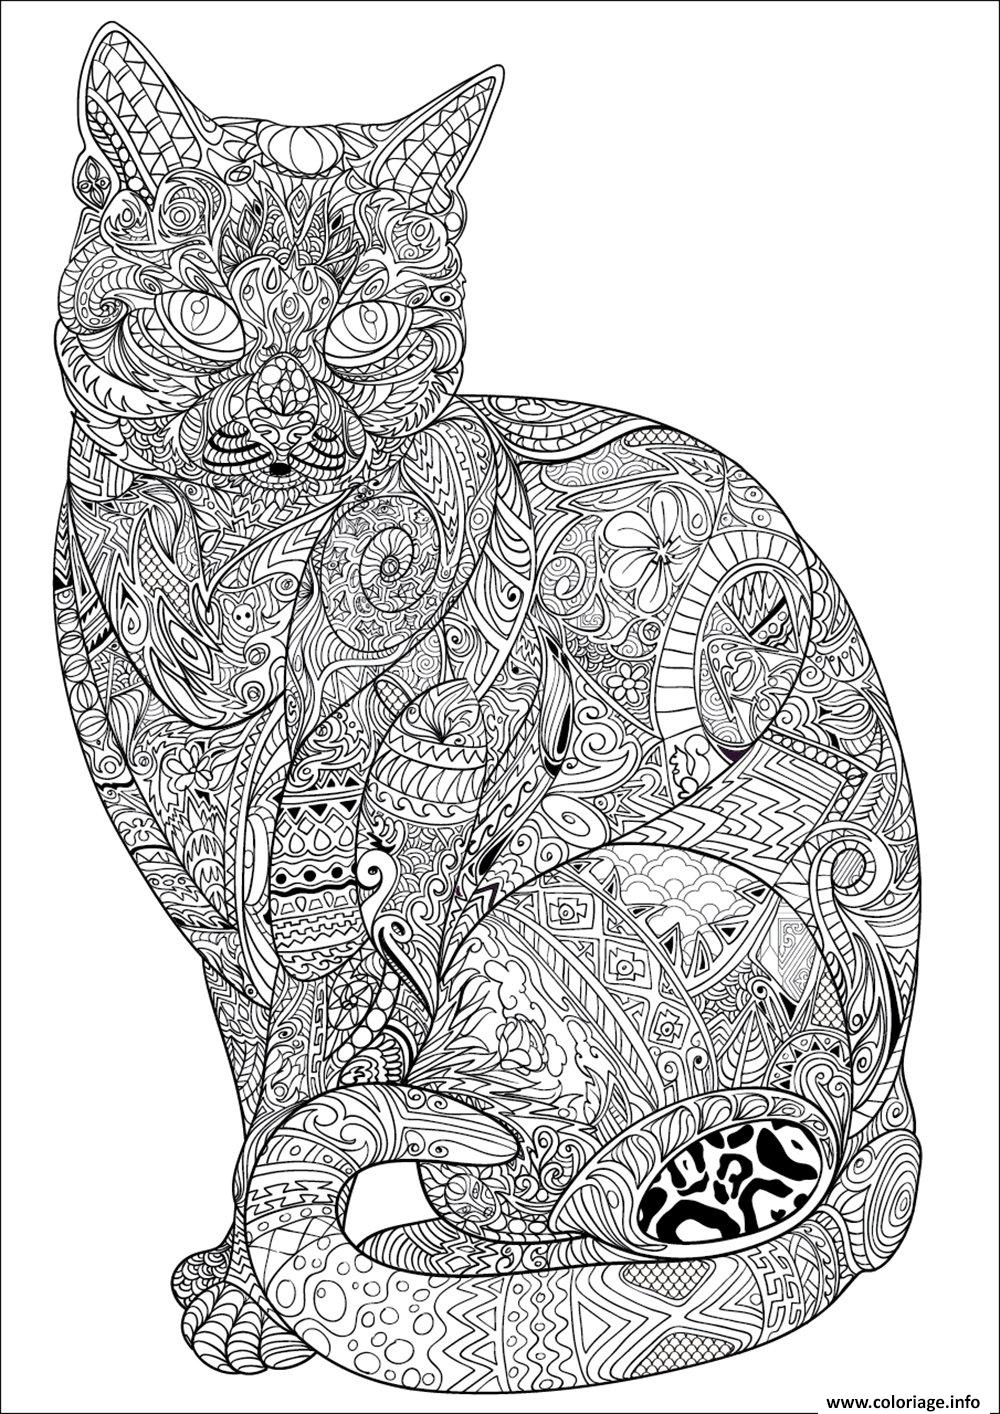 Coloriage Chat Adulte Difficile Antistress Animaux dessin